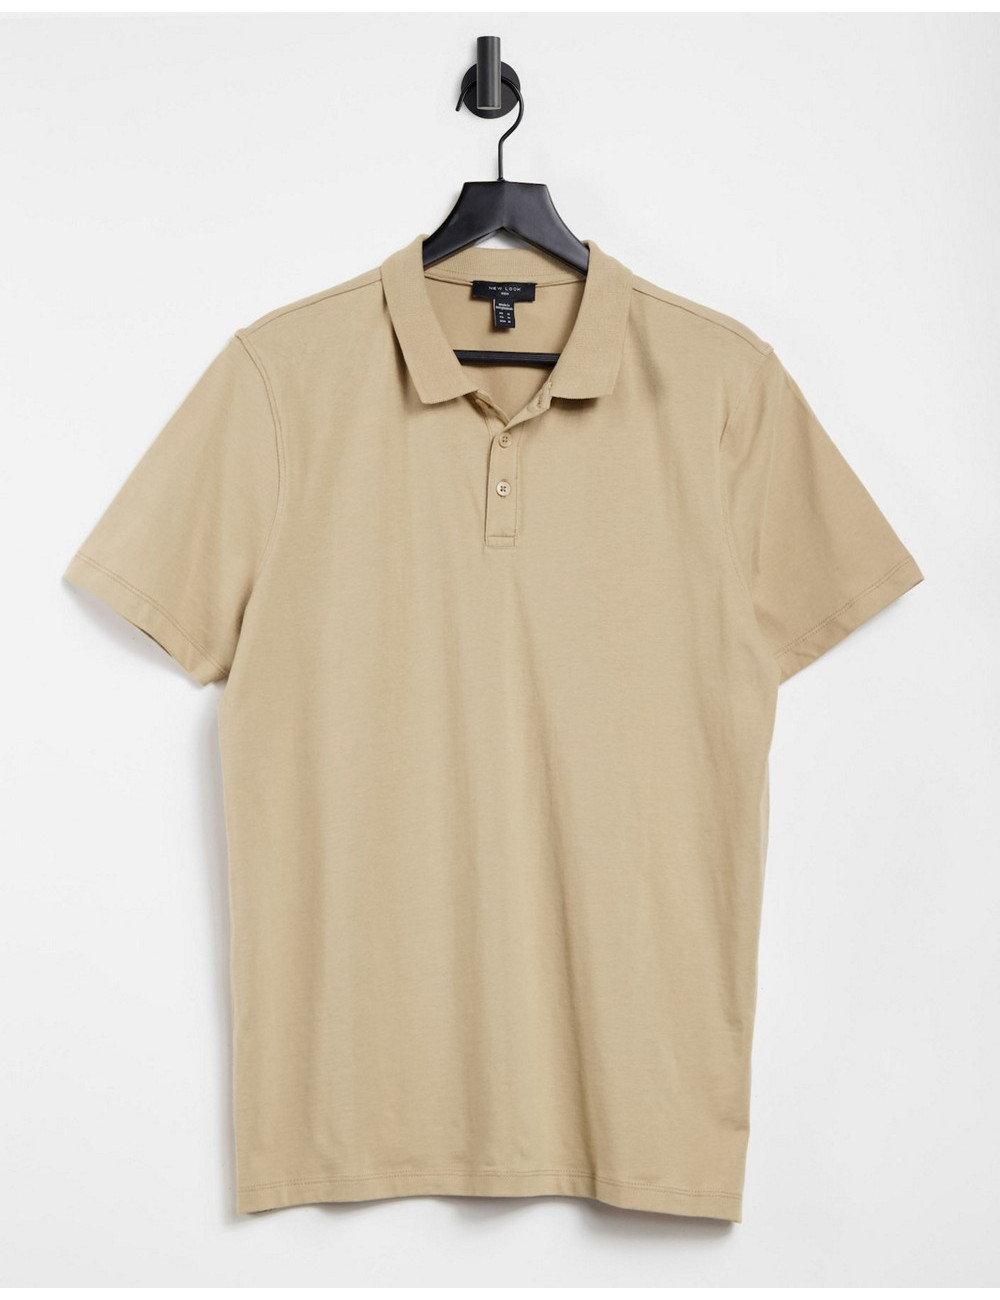 New Look jersey polo in stone